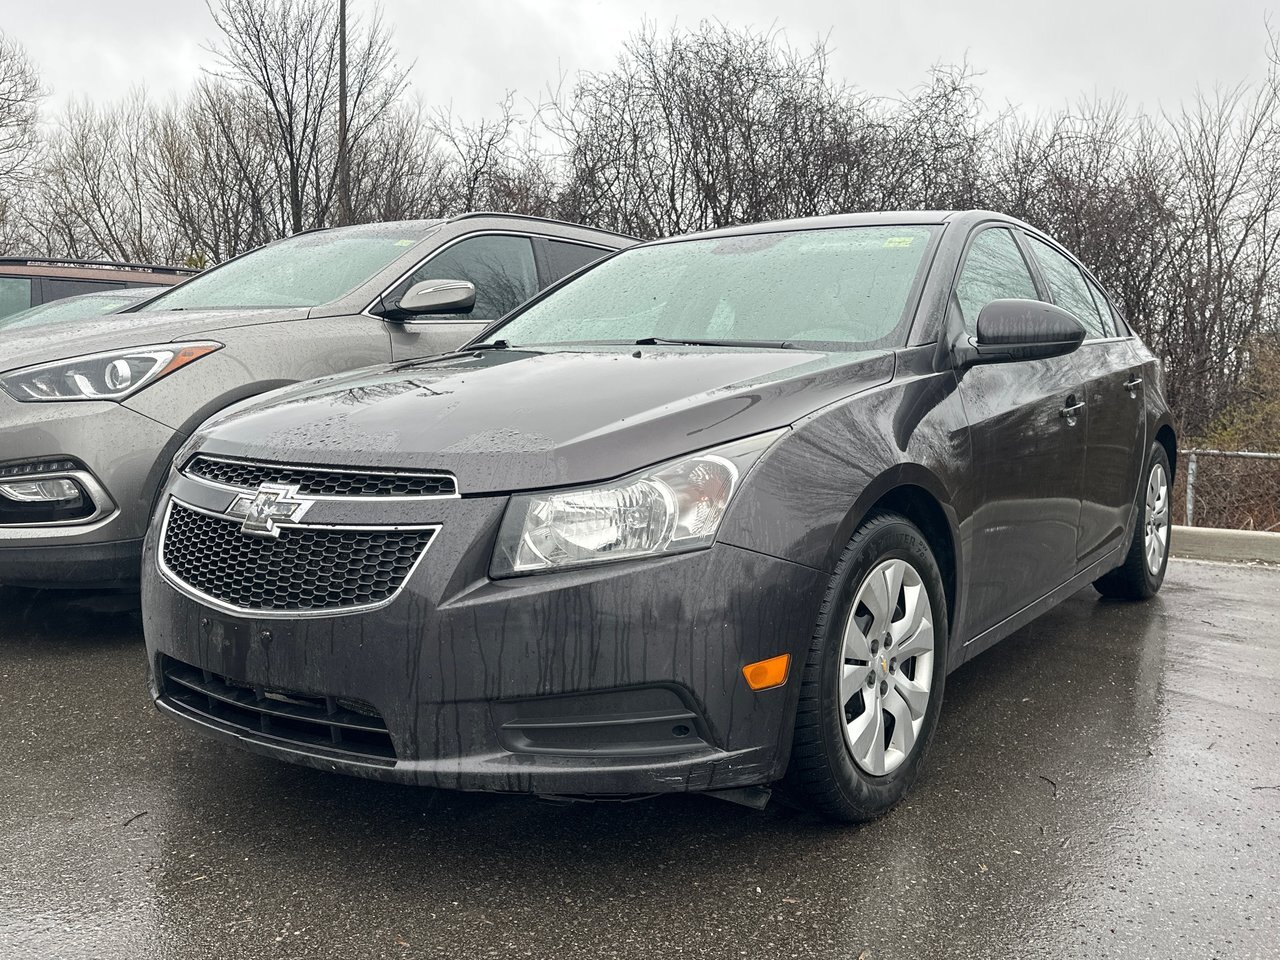 2014 Chevrolet Cruze 1LT AS TRADED - YOU CERTIFY, YOU SAVE / 